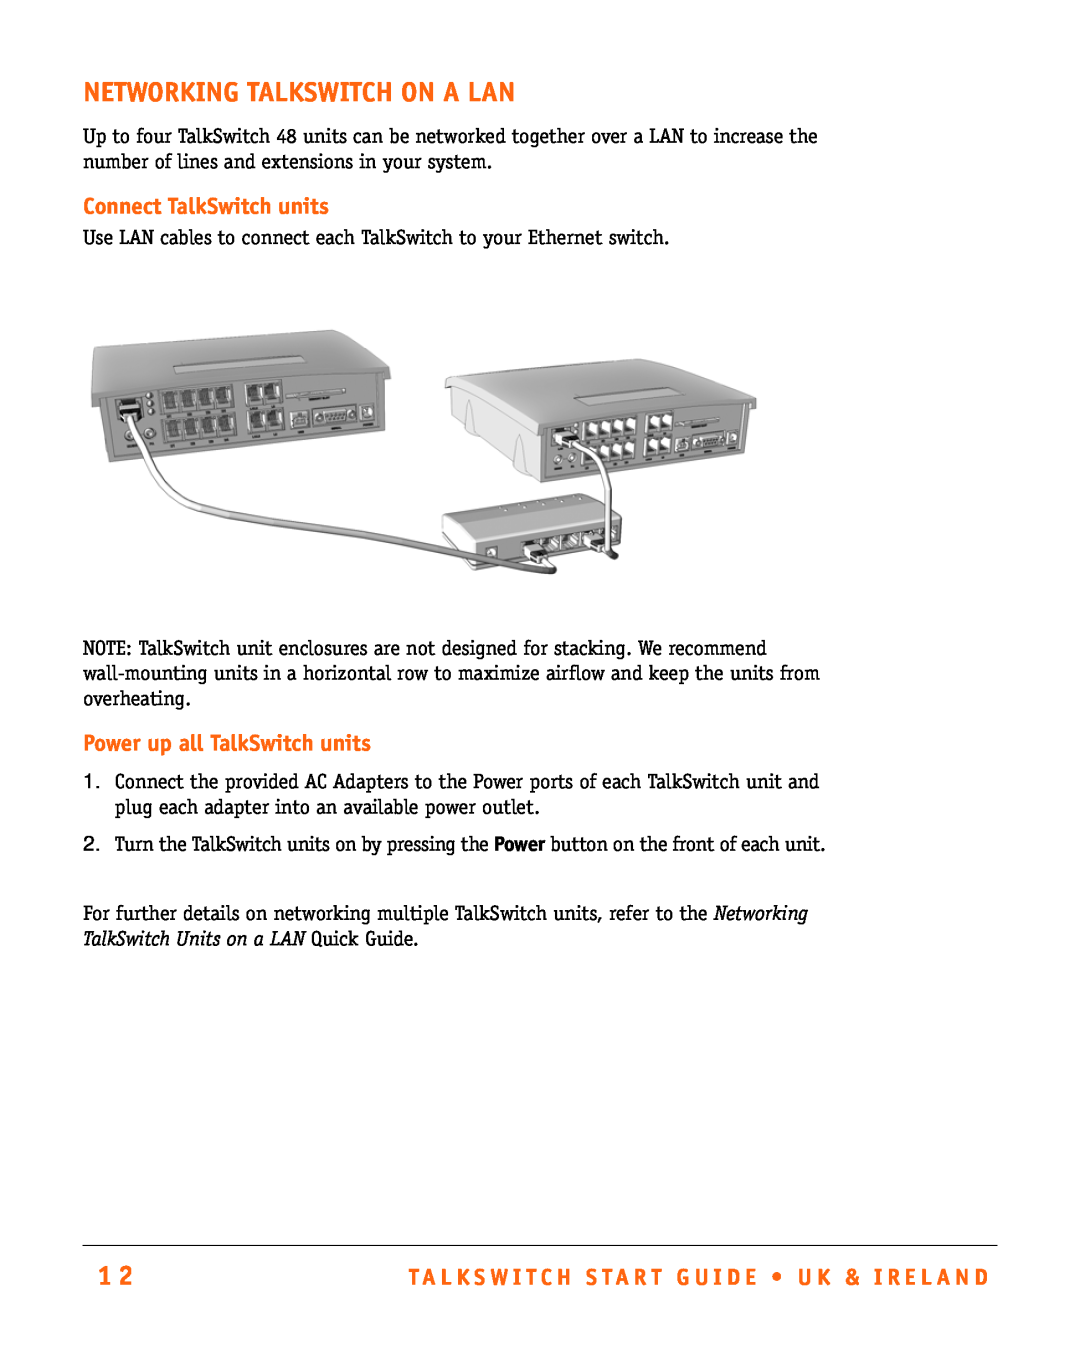 Talkswitch CT.TS005.002501.UK Networking Talkswitch On A Lan, Connect TalkSwitch units, Power up all TalkSwitch units 